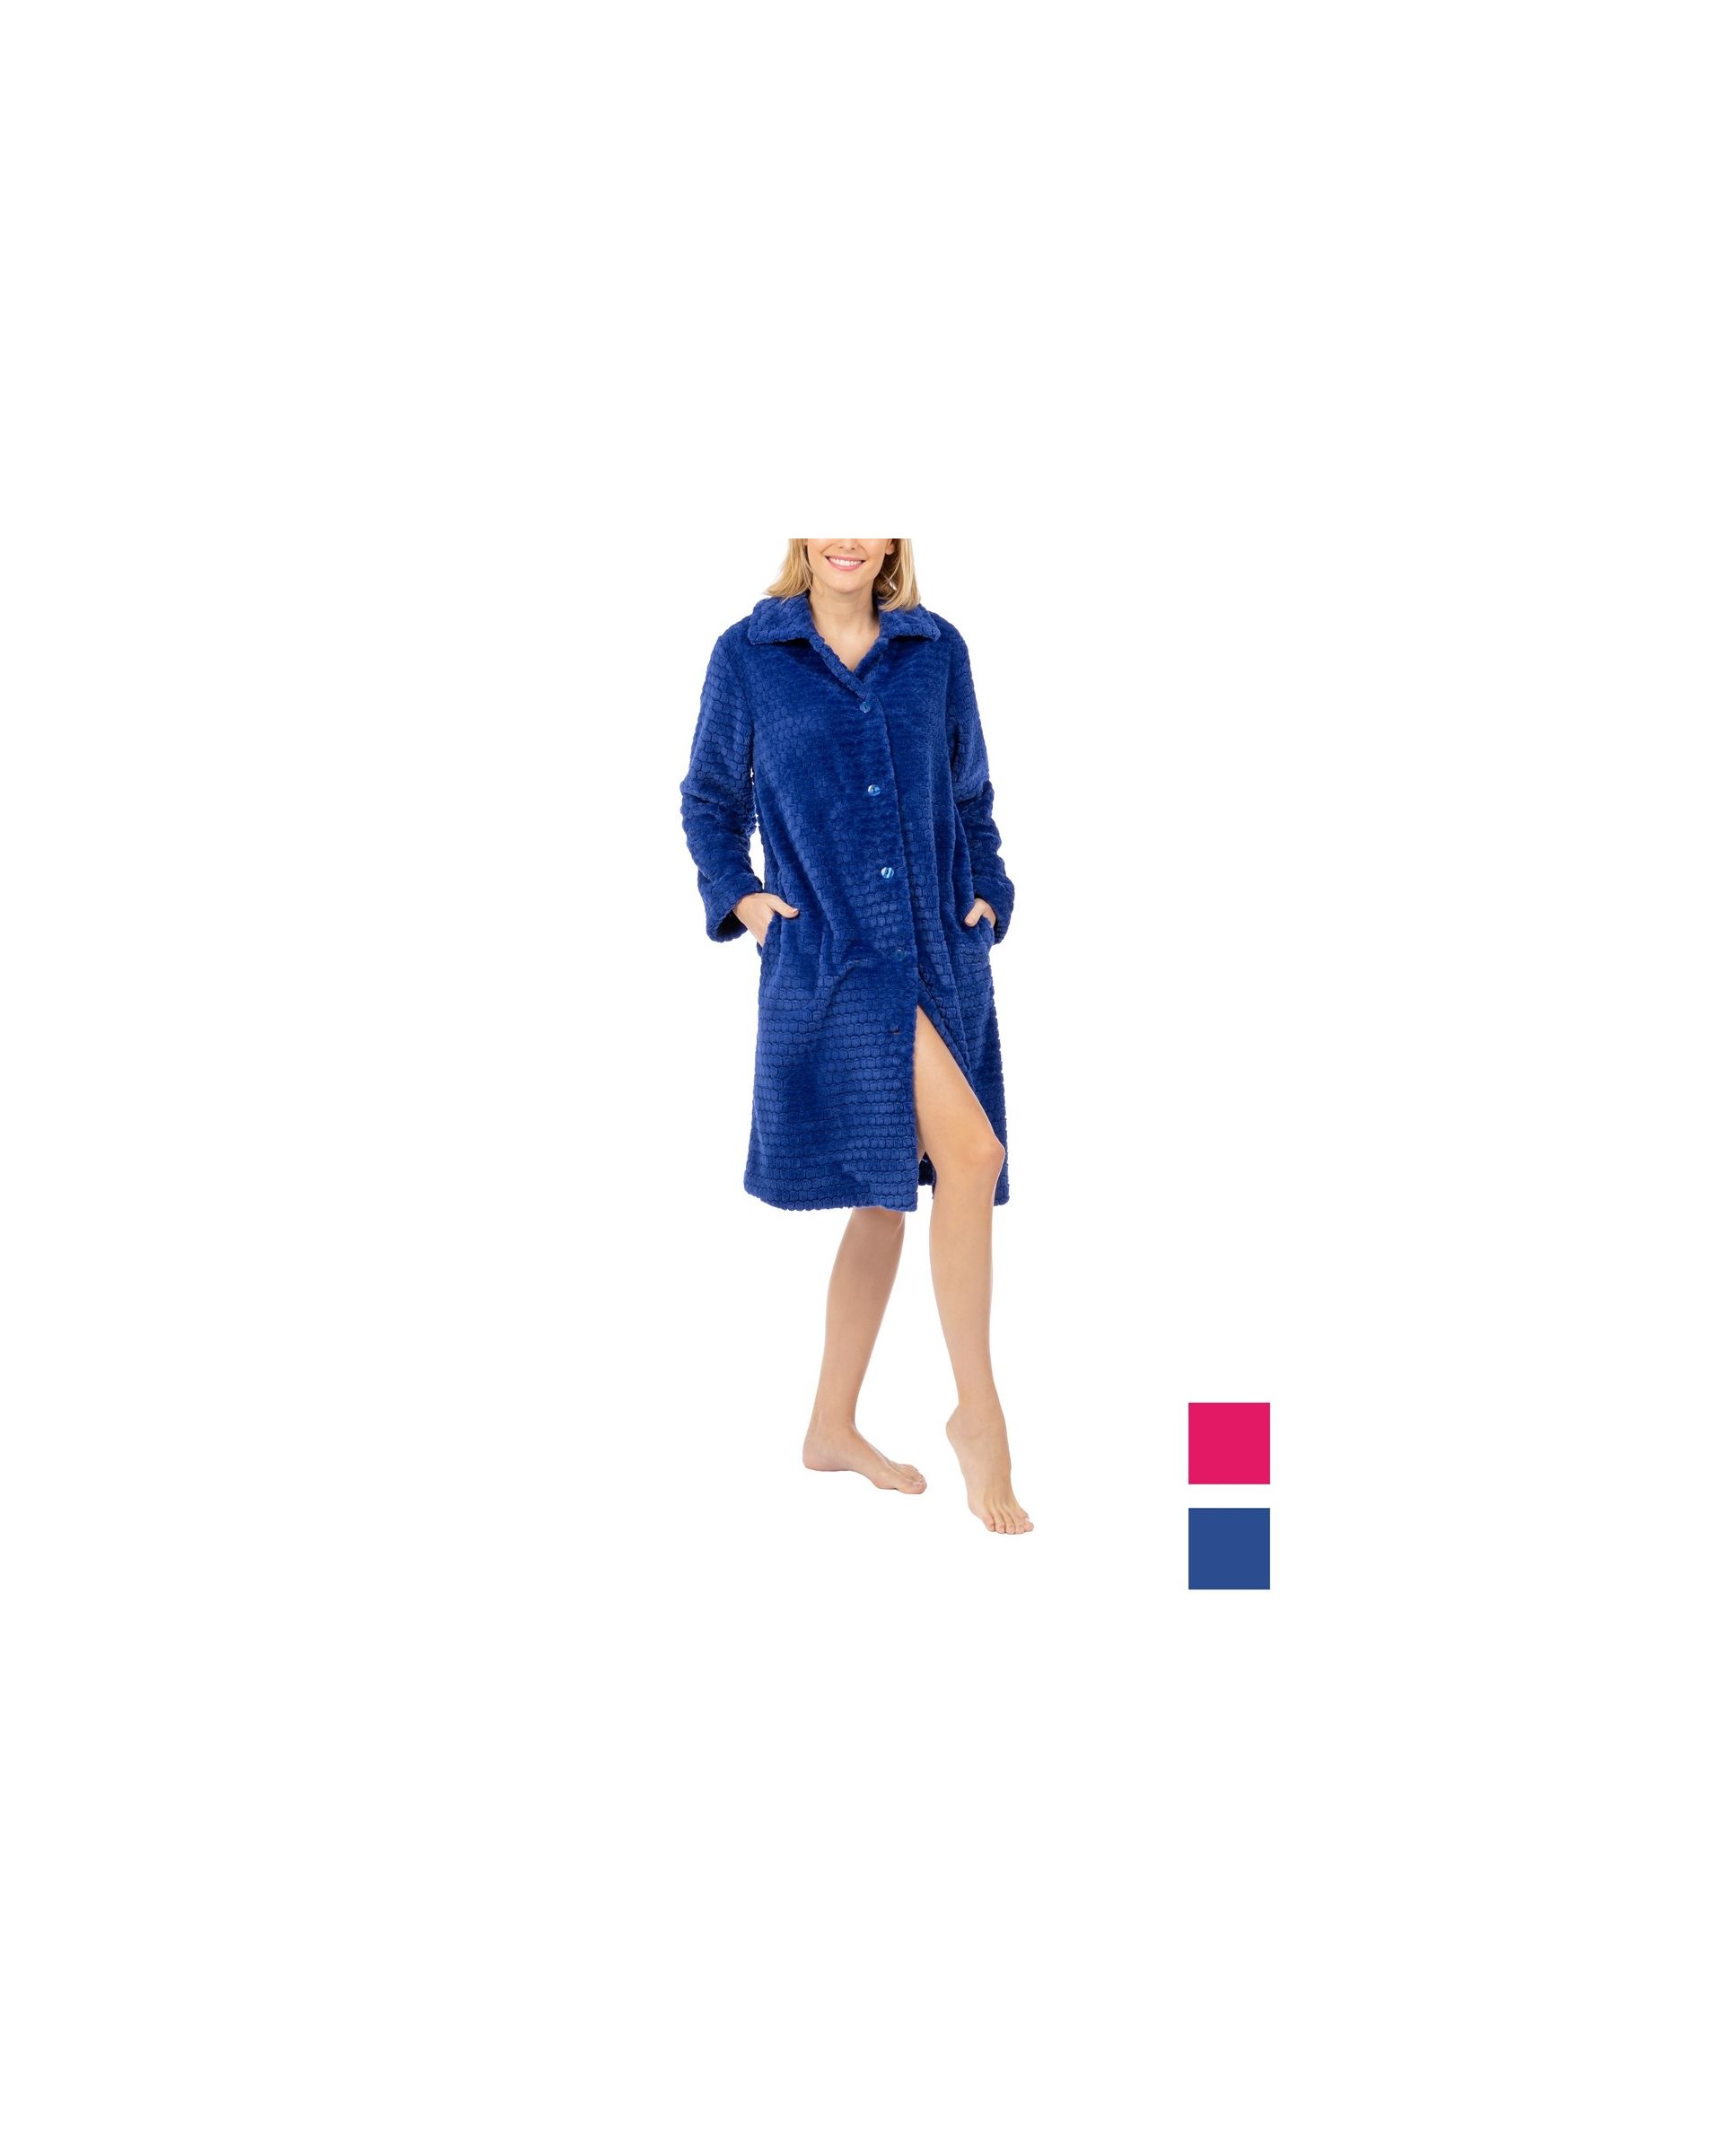 Women's long winter dressing gown with blue buttons